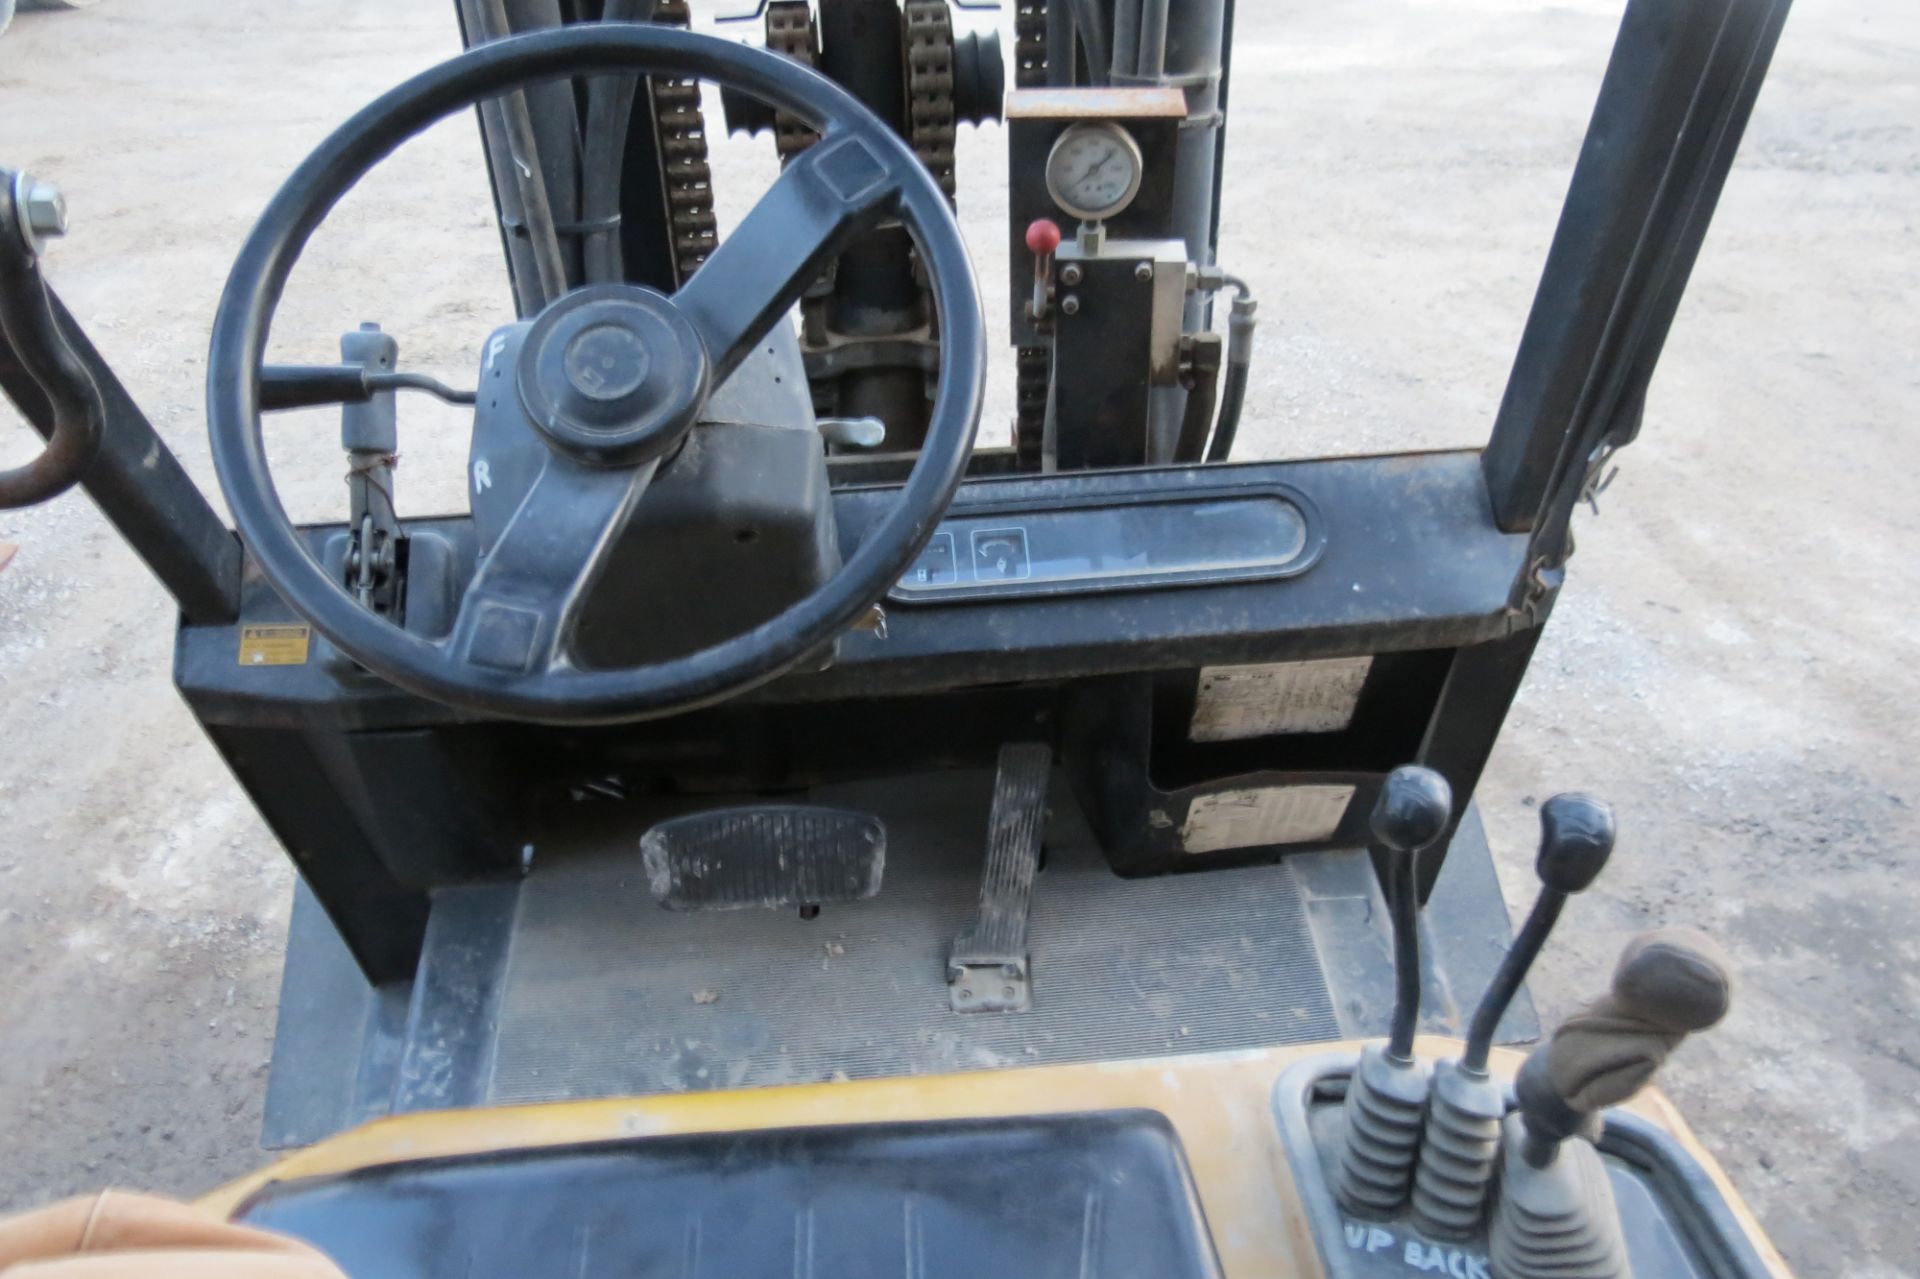 Yale forklift, 4500 lb cap, 3 stage mast, solid tires, LP, 7’ forks, sells with LP tank - Image 11 of 12